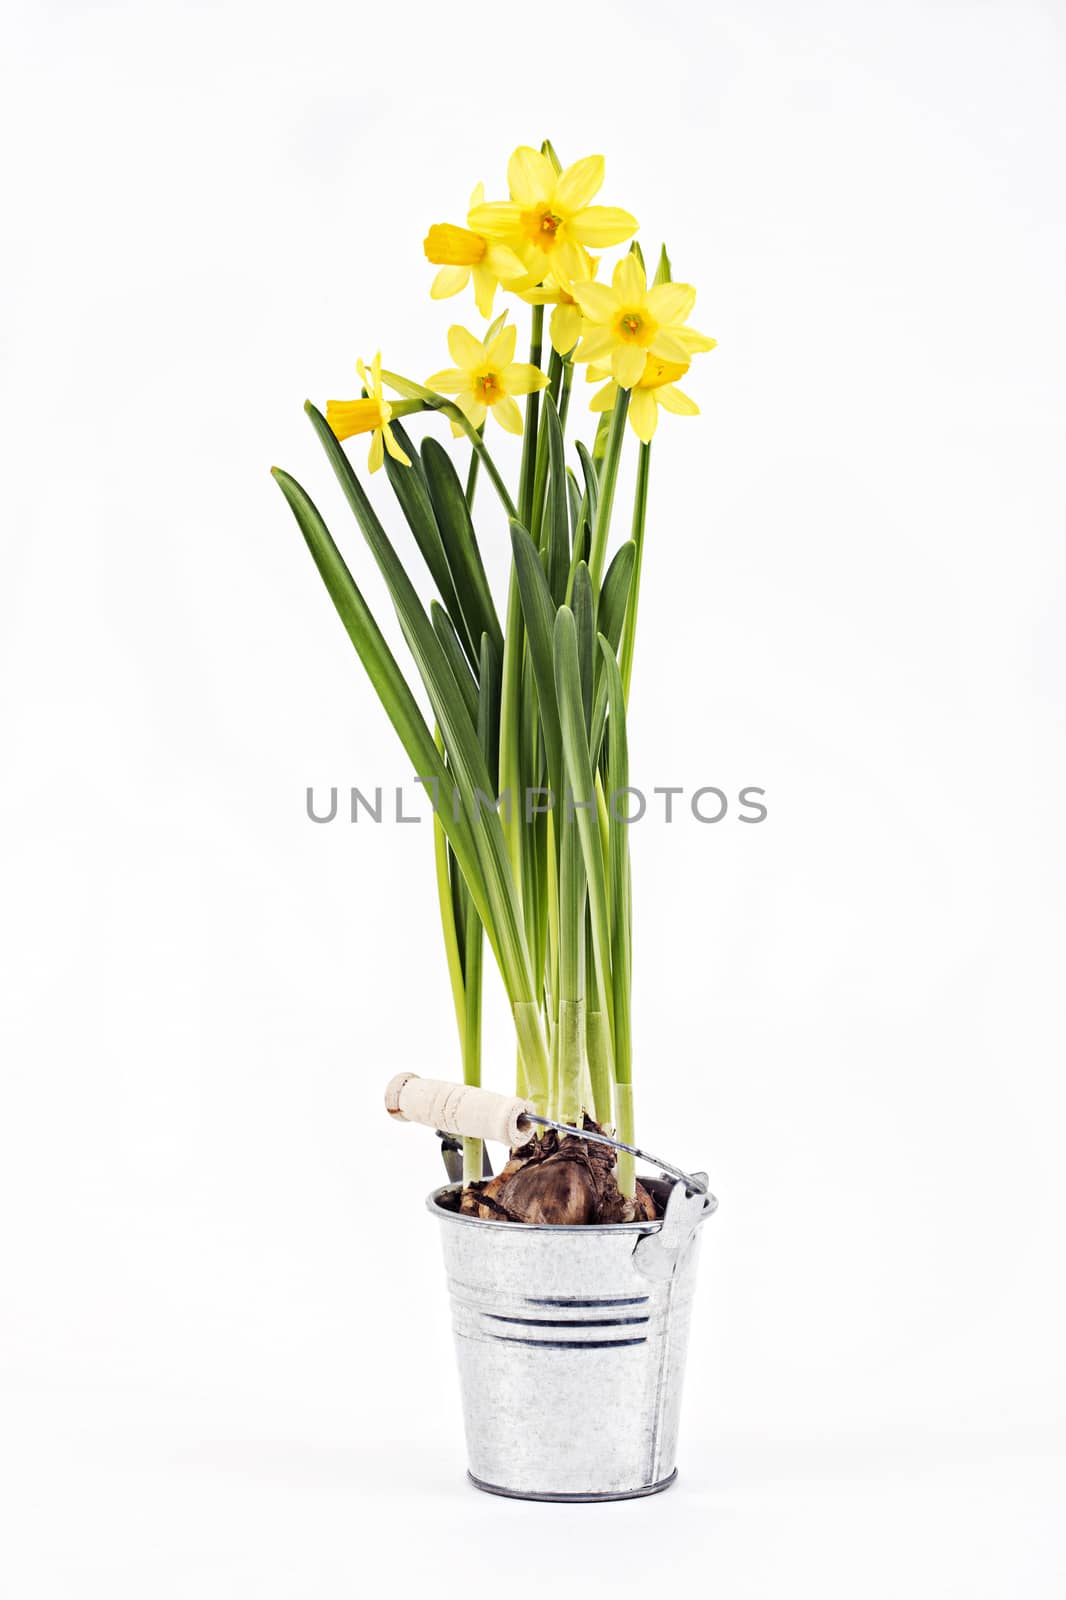 Yellow daffodils in a pot by johan10